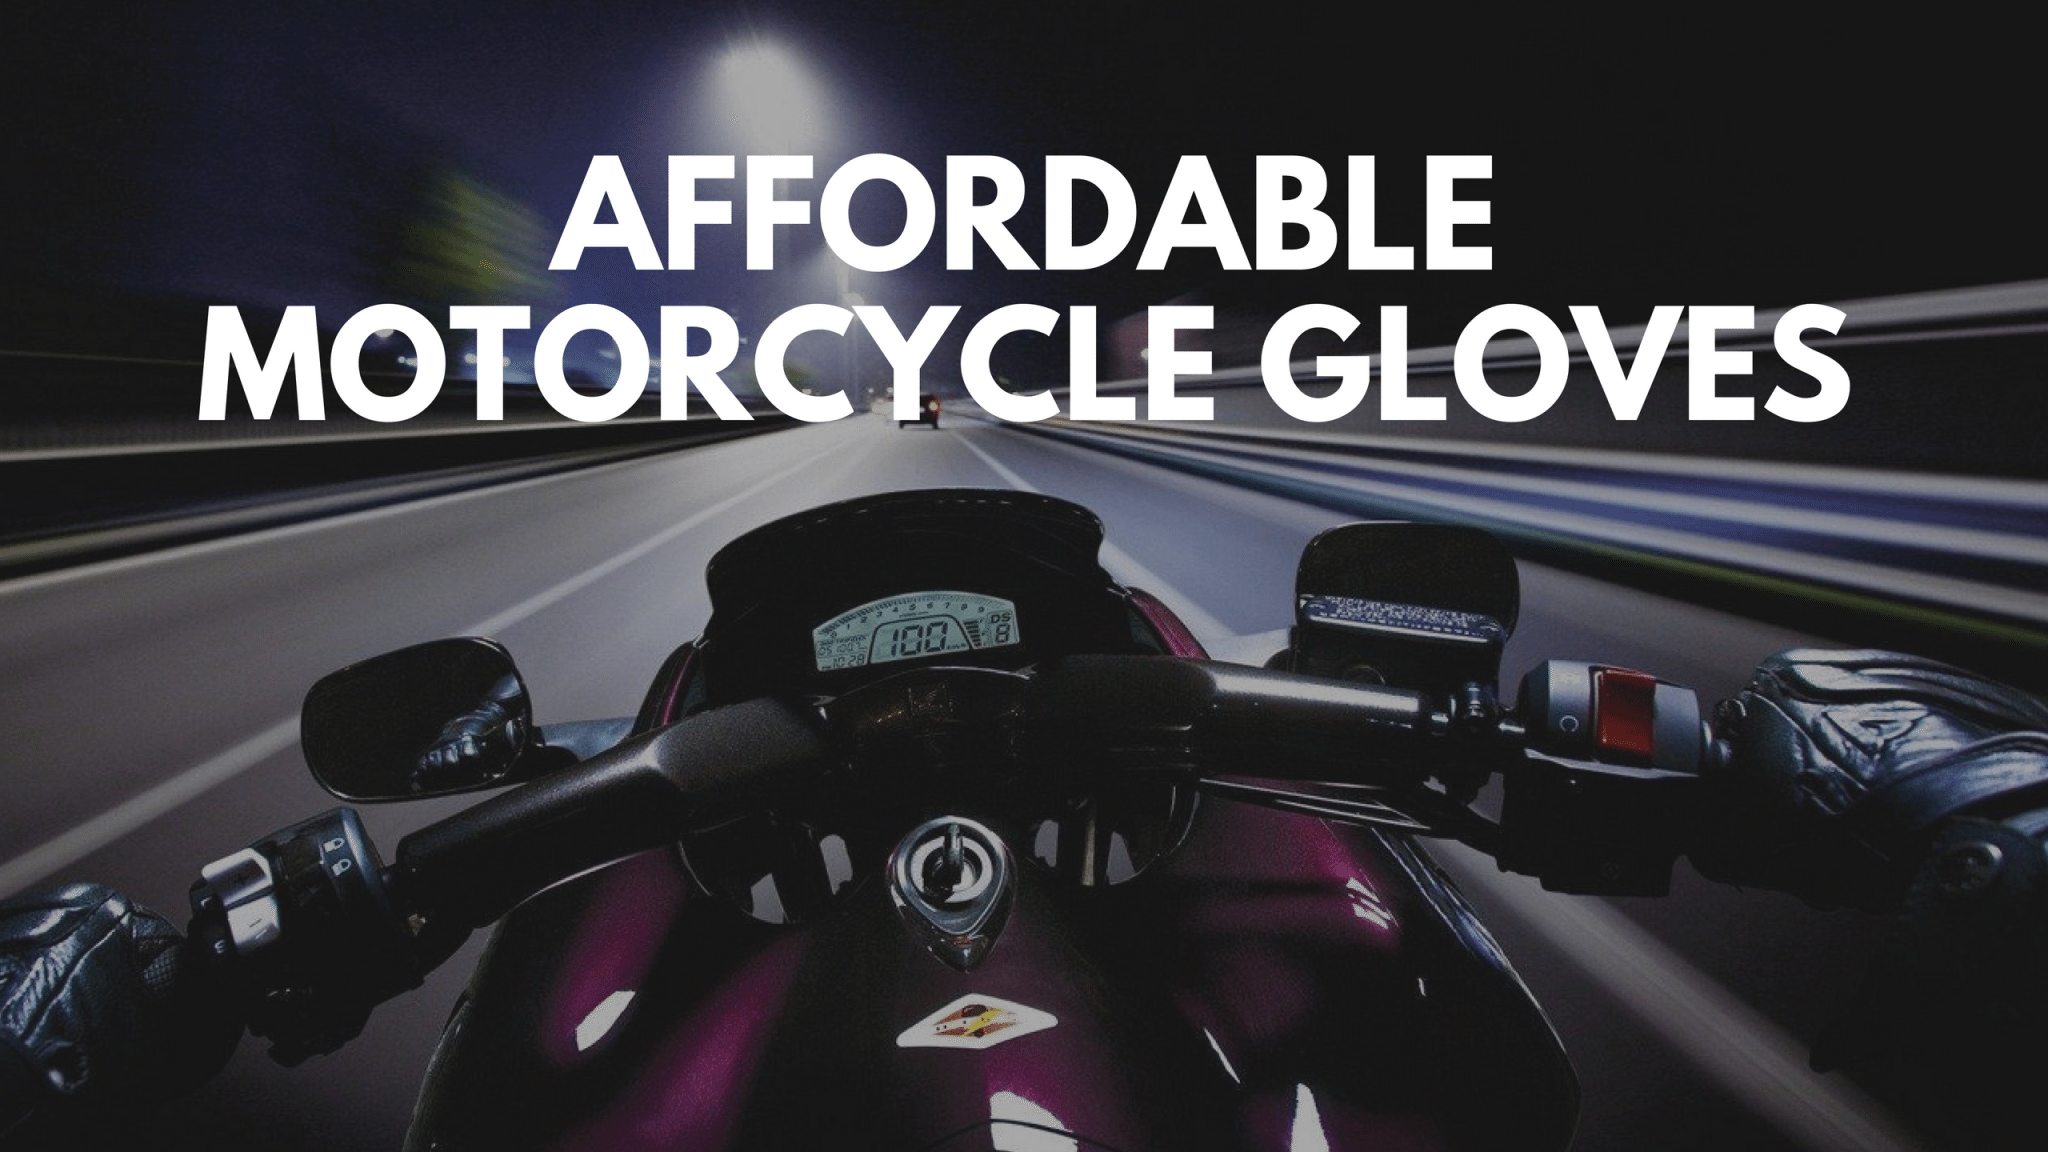 Affordable Motorcycle Gloves for beginners